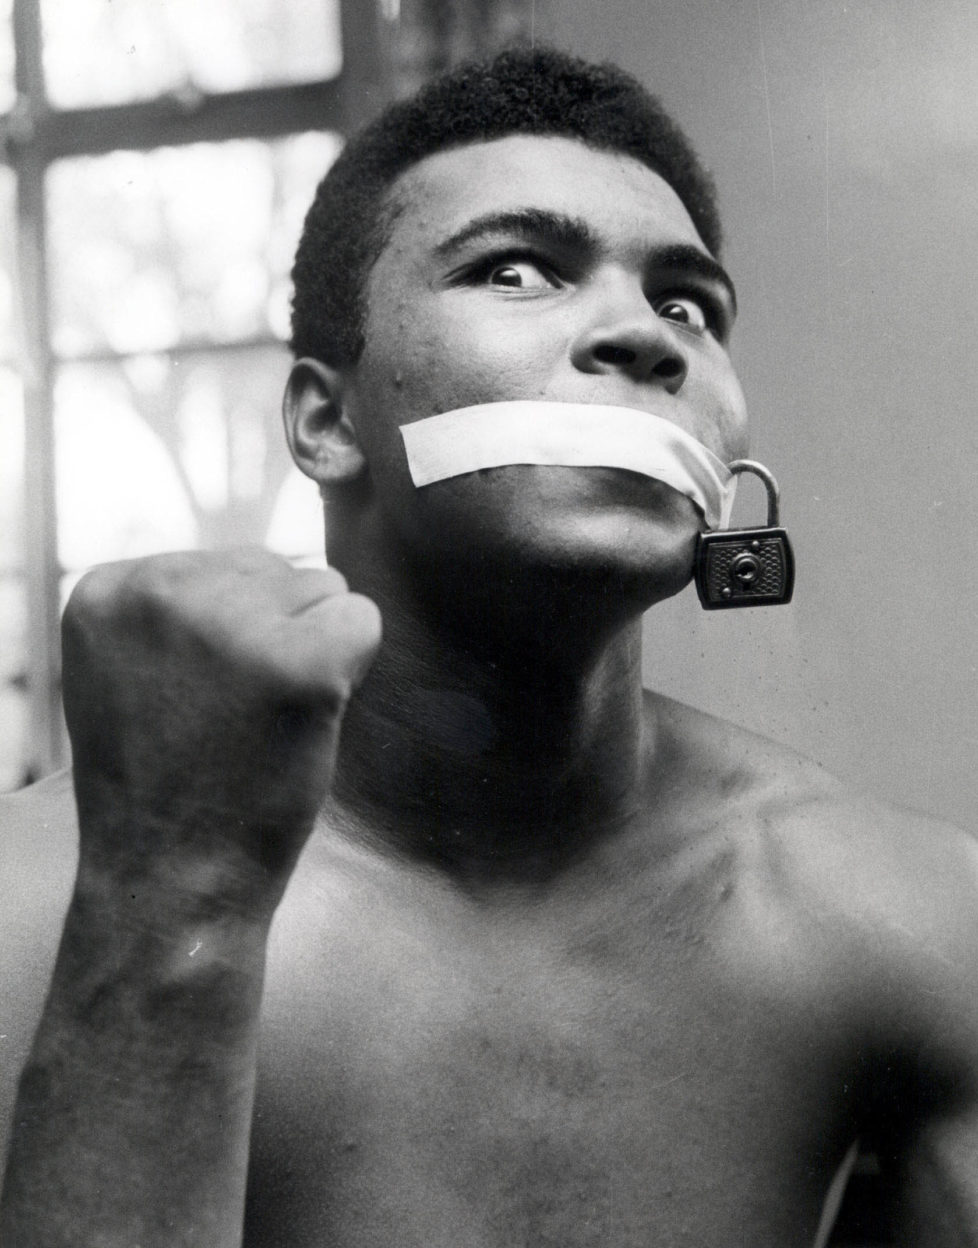 Boxing, 1963, Cassius Clay (later Muhammad Ali) is gagged with a piece of tape and a padlock (Photo by Bob Thomas/Getty Images)